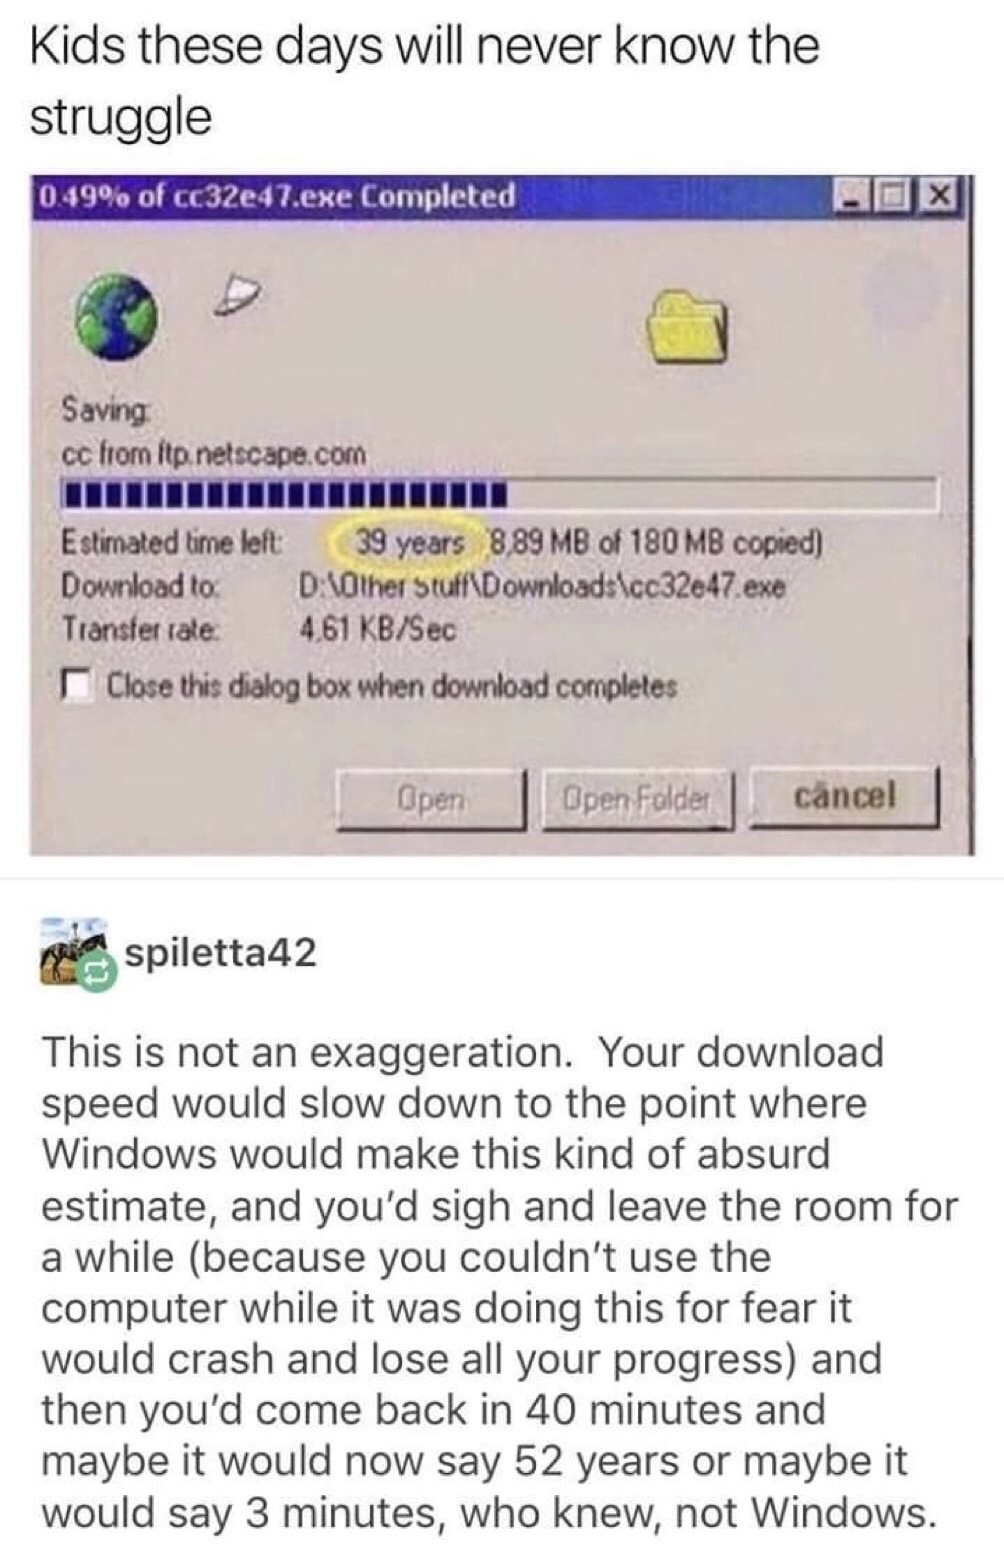 memes - windows estimated time meme - Kids these days will never know the struggle 0.49% of cc32ed7.exe Completed Rox Saving cc from itp netscape.com Estimated time left 39 years 8,89 Mb of 180 Mb copied Download to D10ther Stuff\Downloads\cc32e47.exe Tra